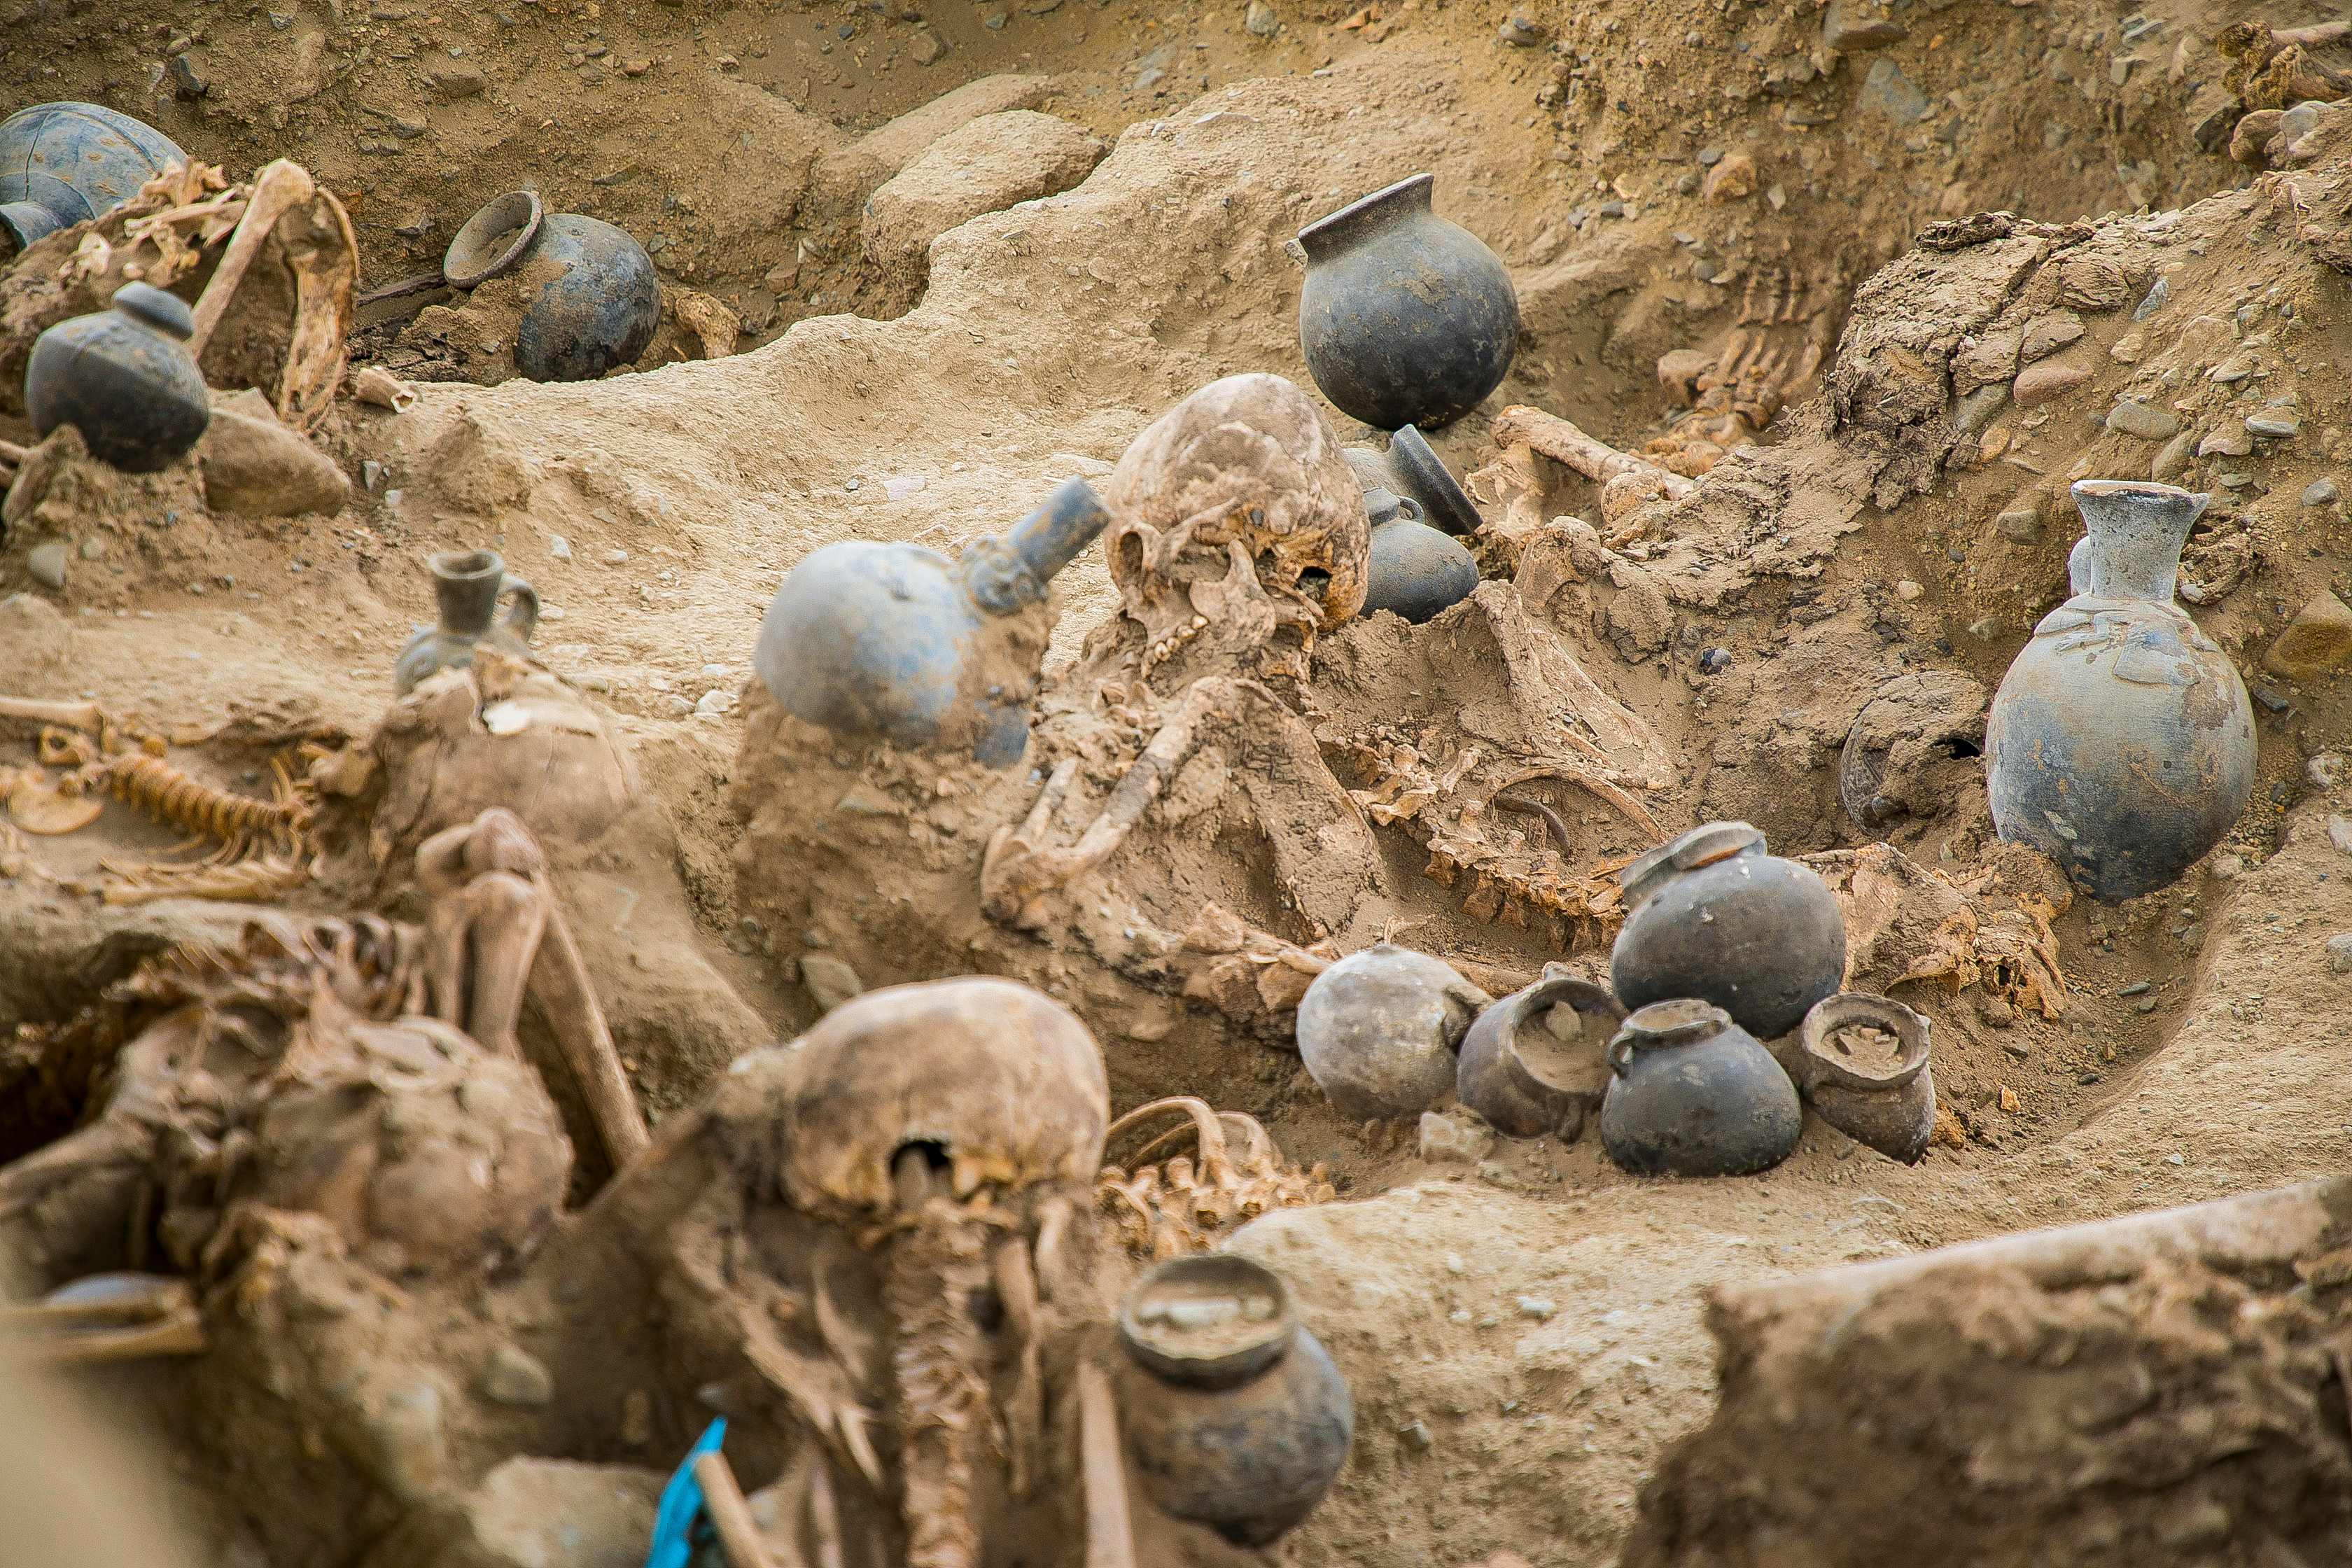 Handout picture released by Peruvian Ministry of Culture showing the human remains discovered at the archaeological complex of Chan Chan, in Trujillo, Peru on November 11, 2021.